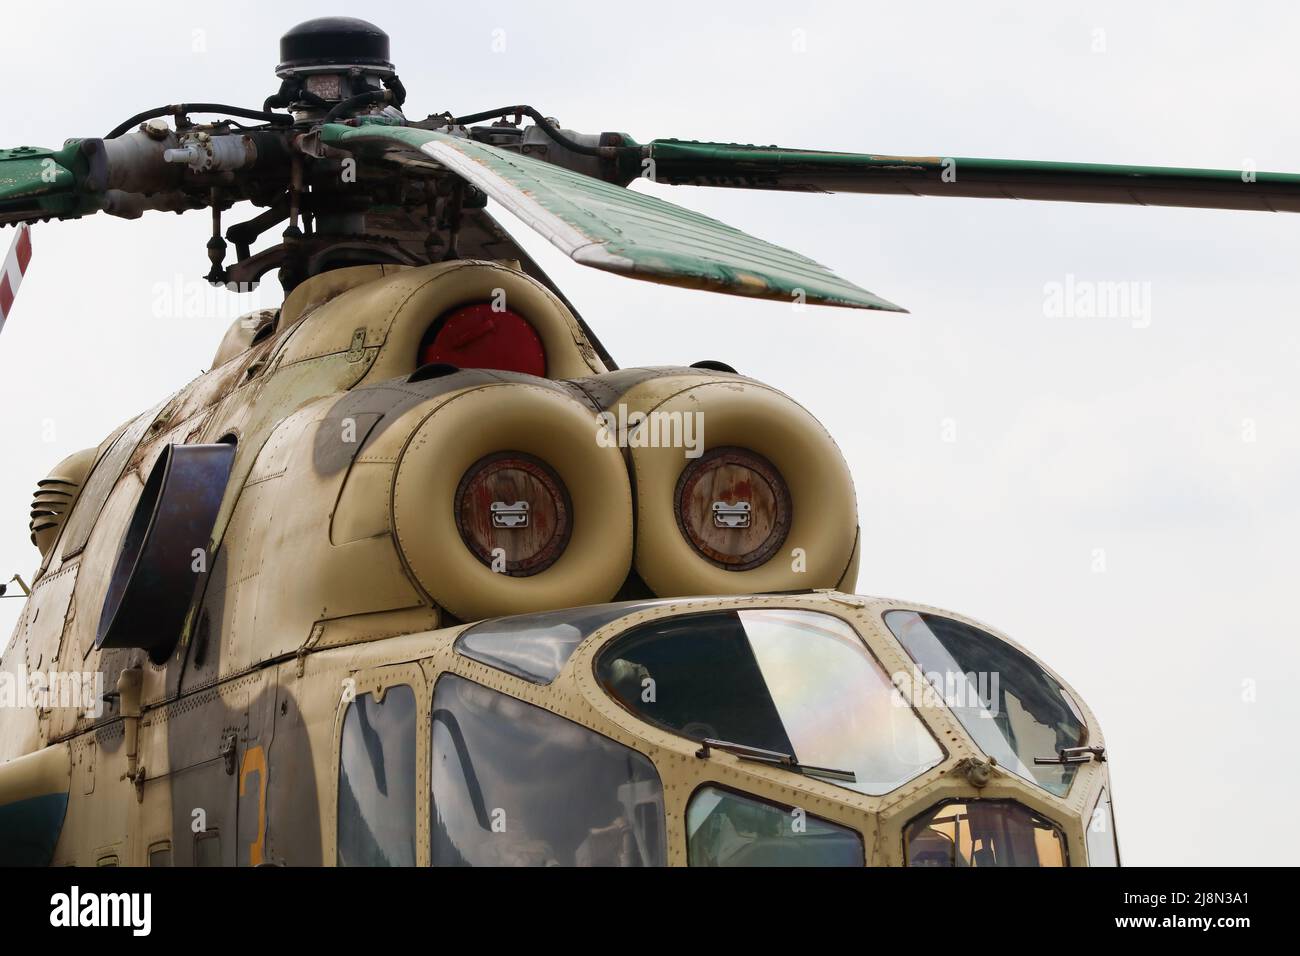 Russian Gunship Attack Helicopter Front Cockpit Abstract Stockfoto